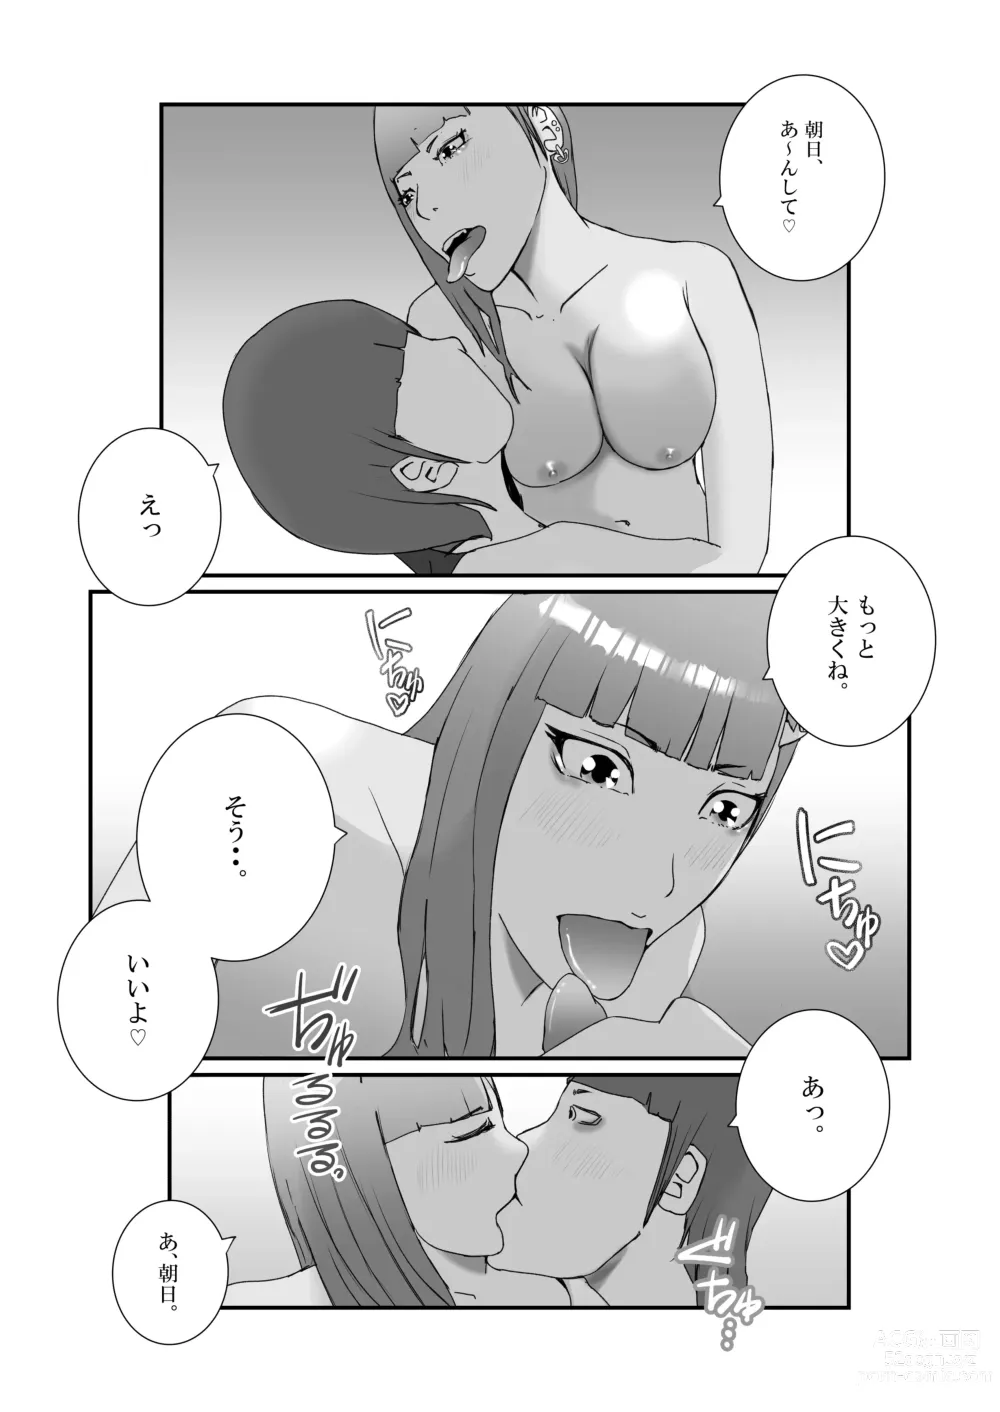 Page 24 of doujinshi Serious sex with a popular idol in the toilet during a class reunion. From cleaning blowjob to creampie..